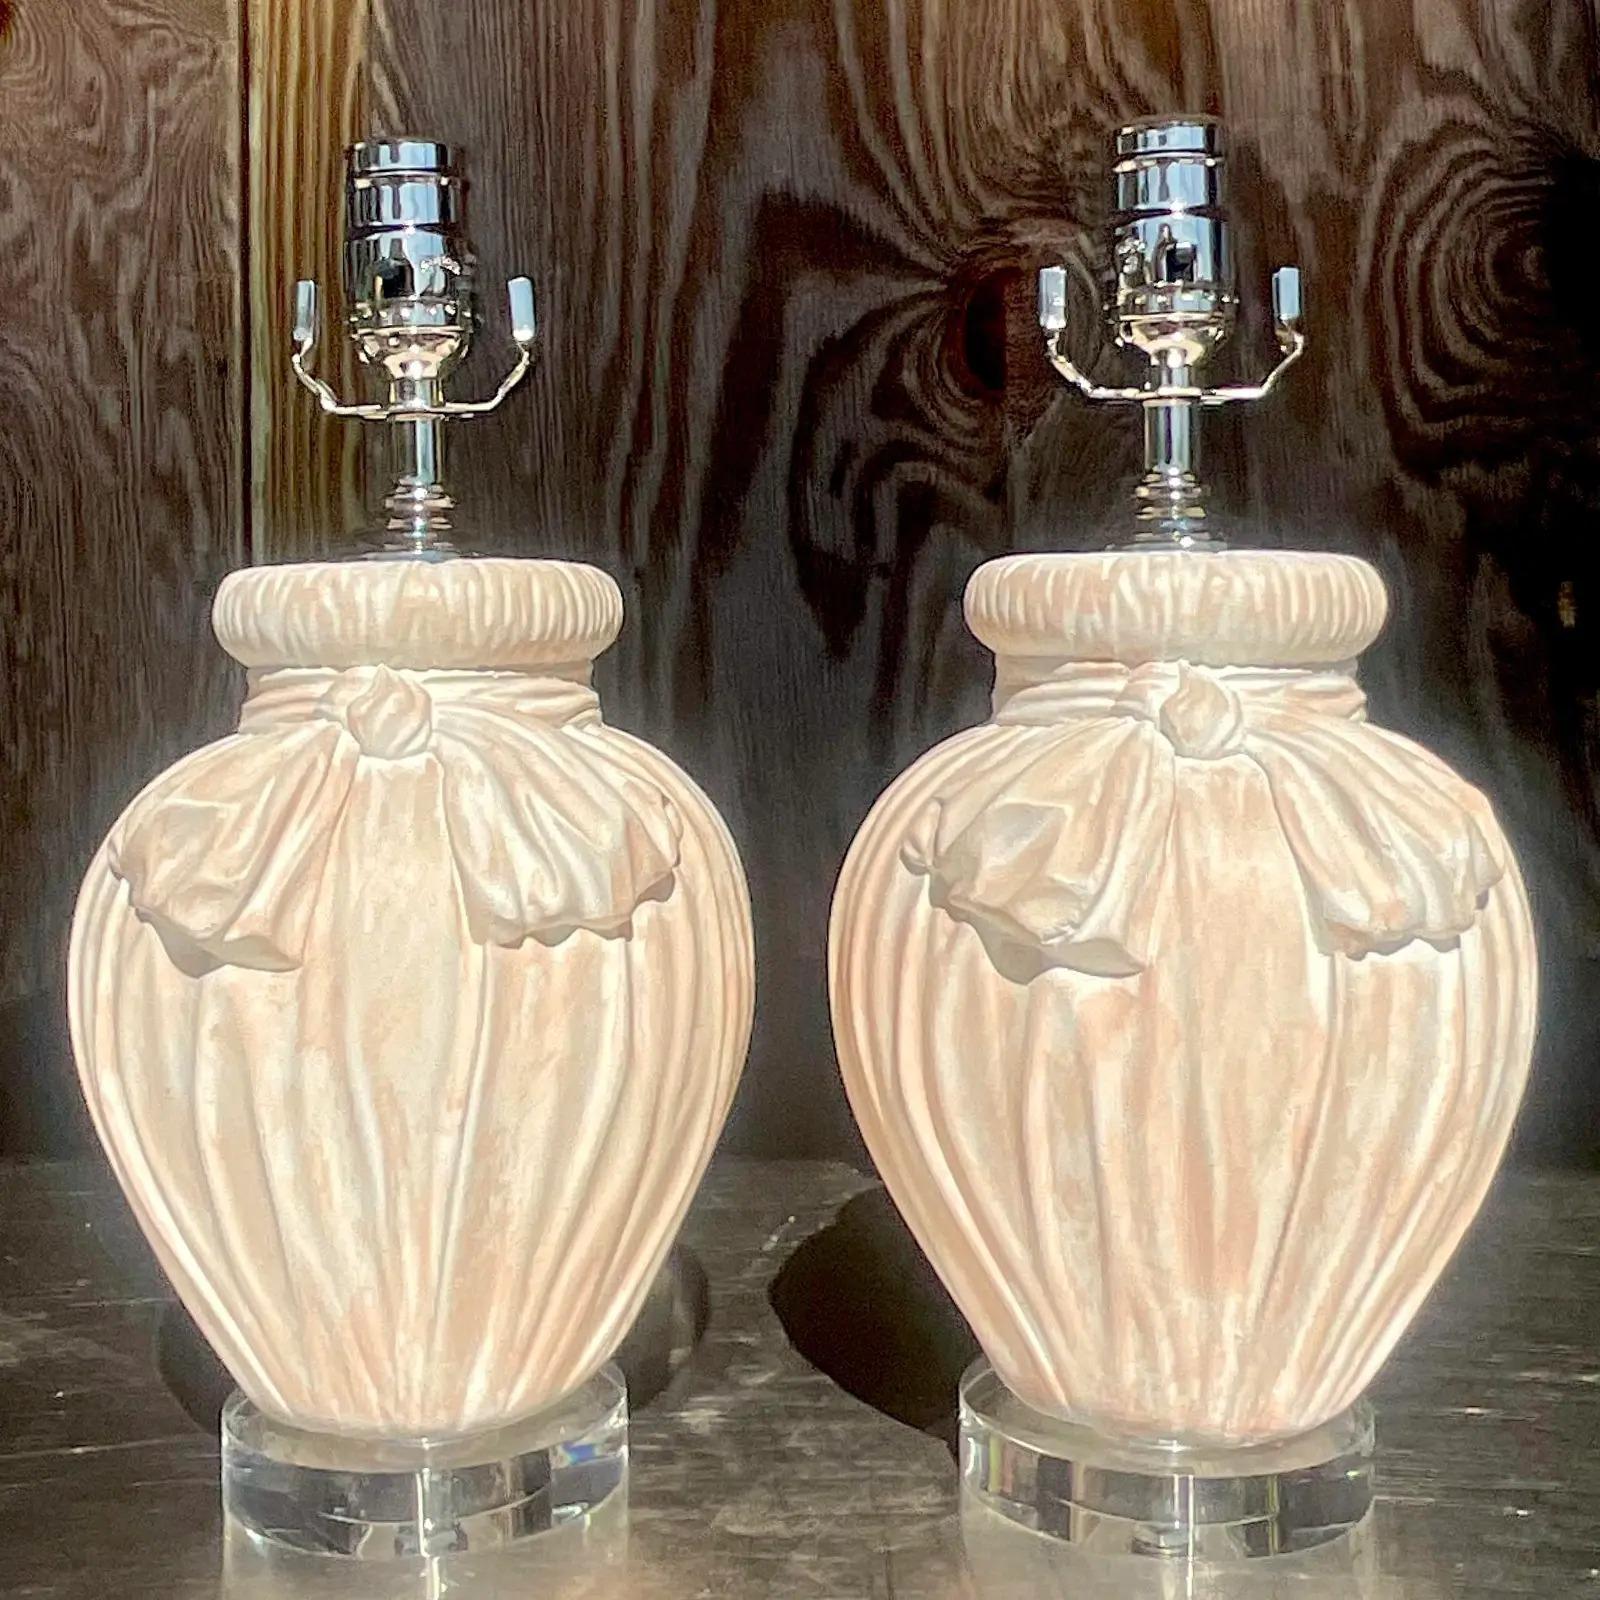 The most stunning pair of vintage plaster table lamps. A beautiful tied bow design in a chic cerused finish. Fully restored with all new wiring, hardware and lucite plinths. Acquired from a Palm Beach estate.